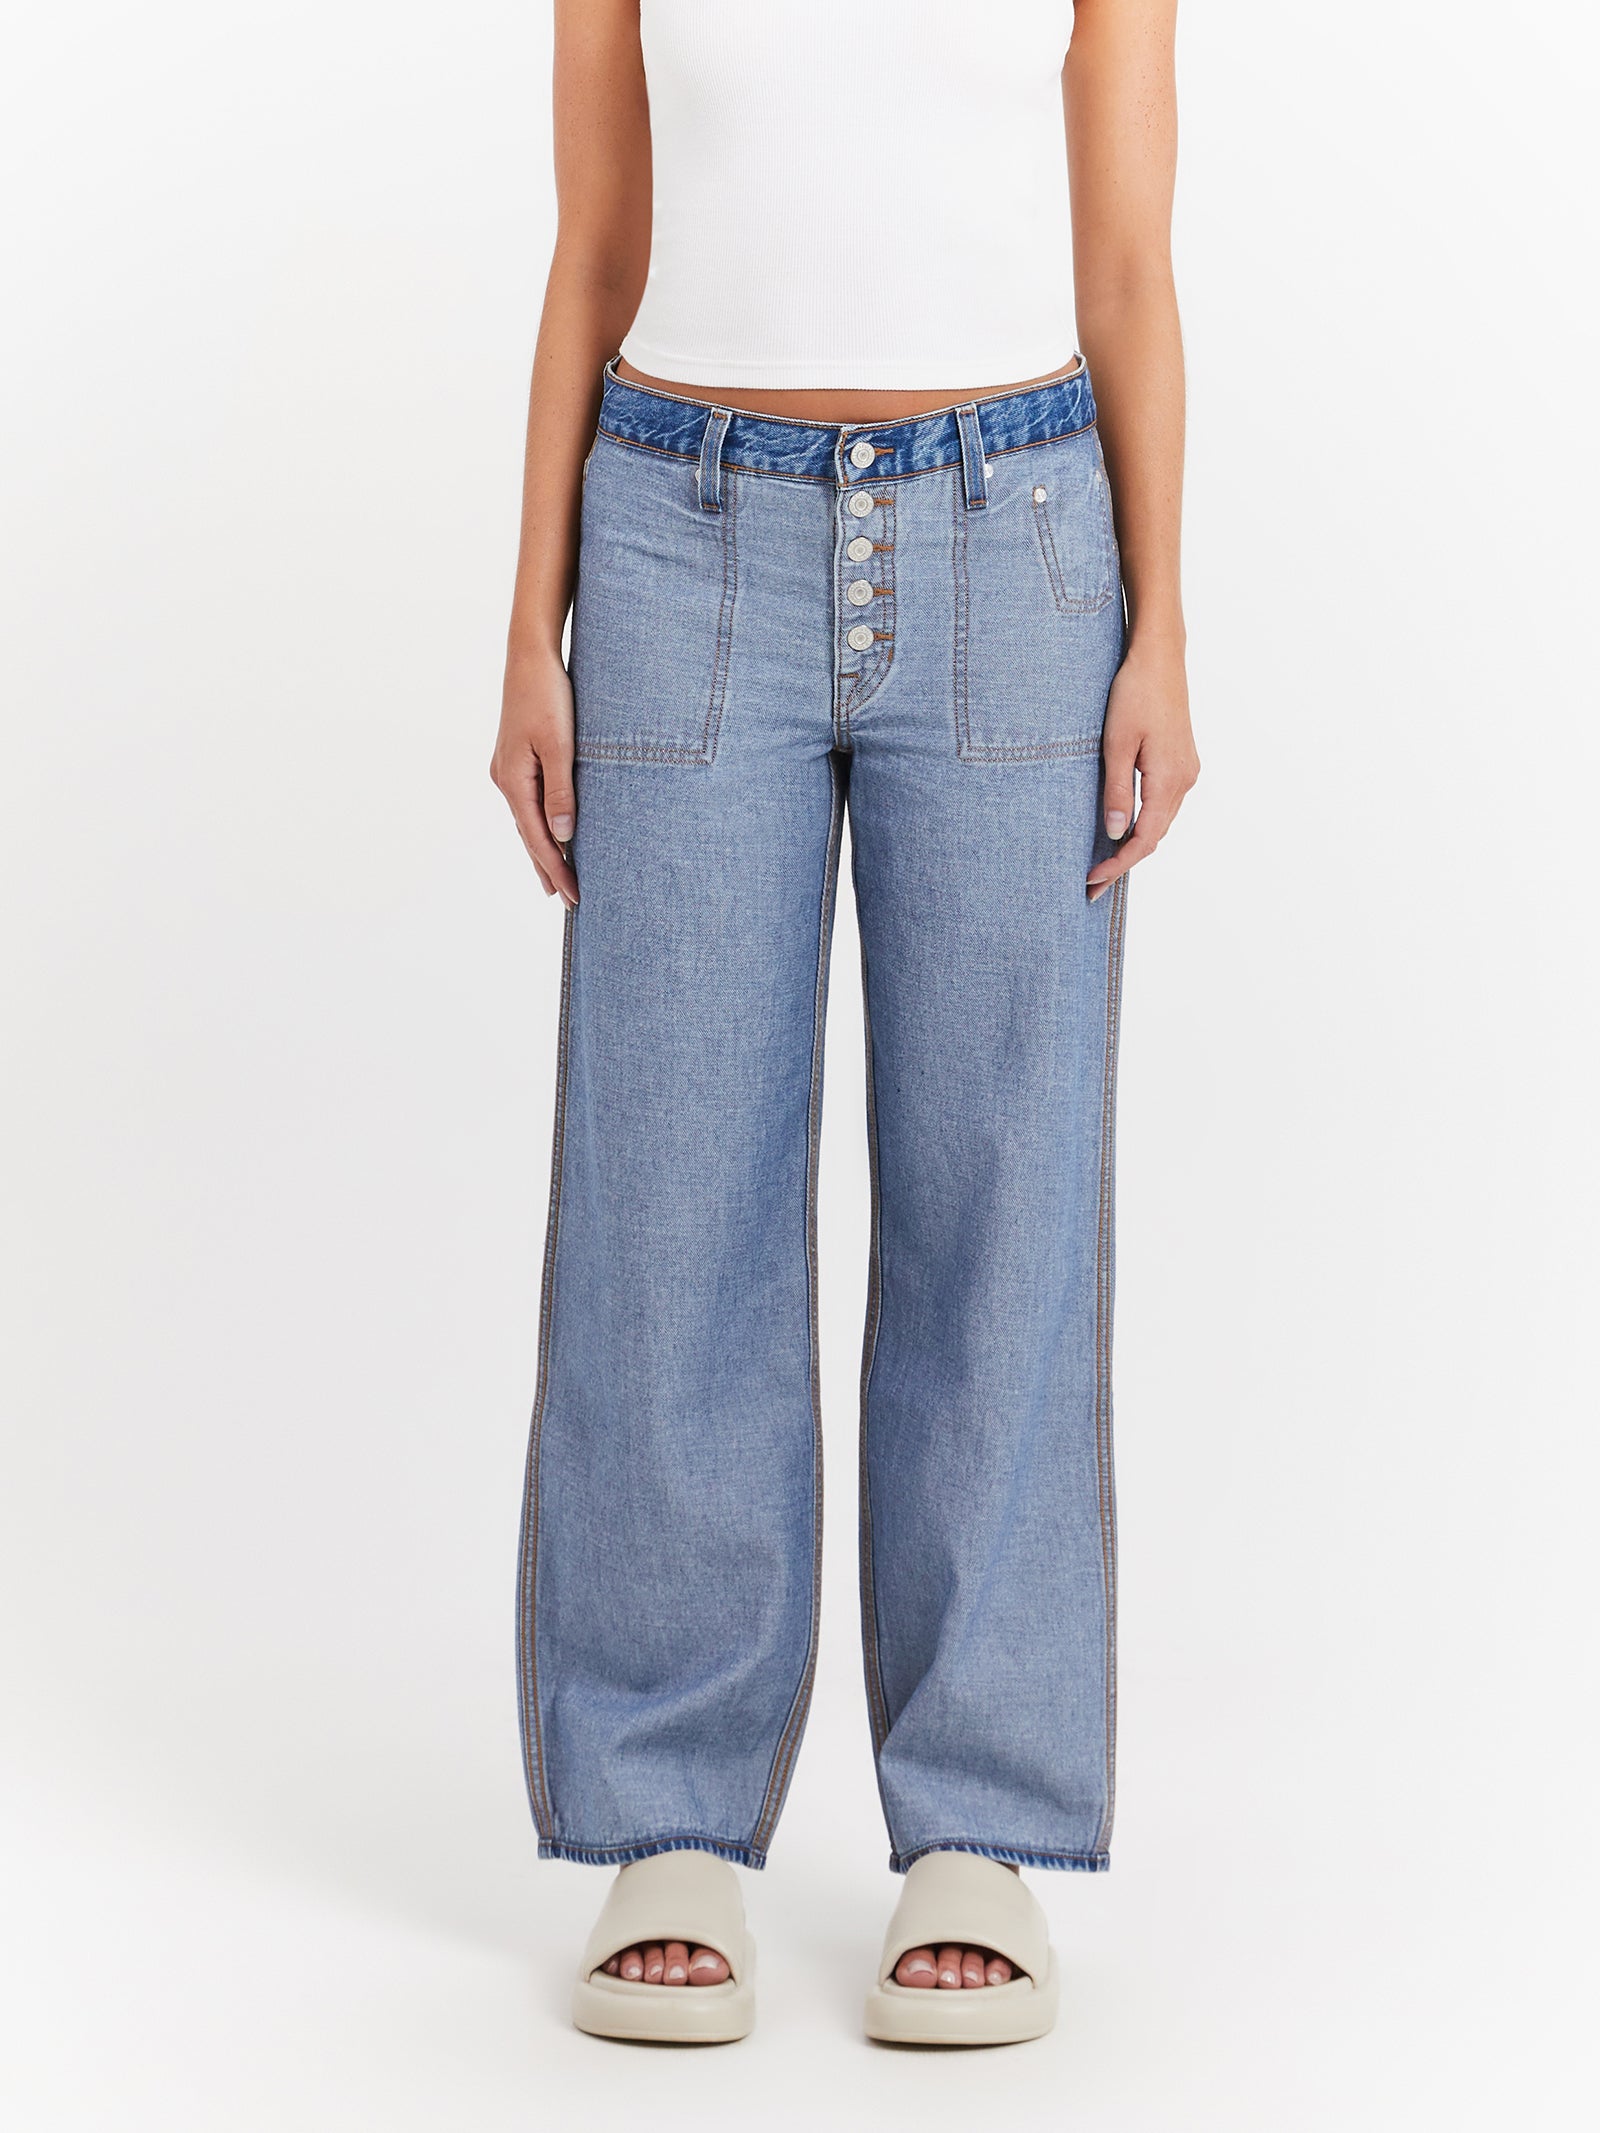 Reversible Baggy Dad Jeans in Soft As Butter Medium Blue